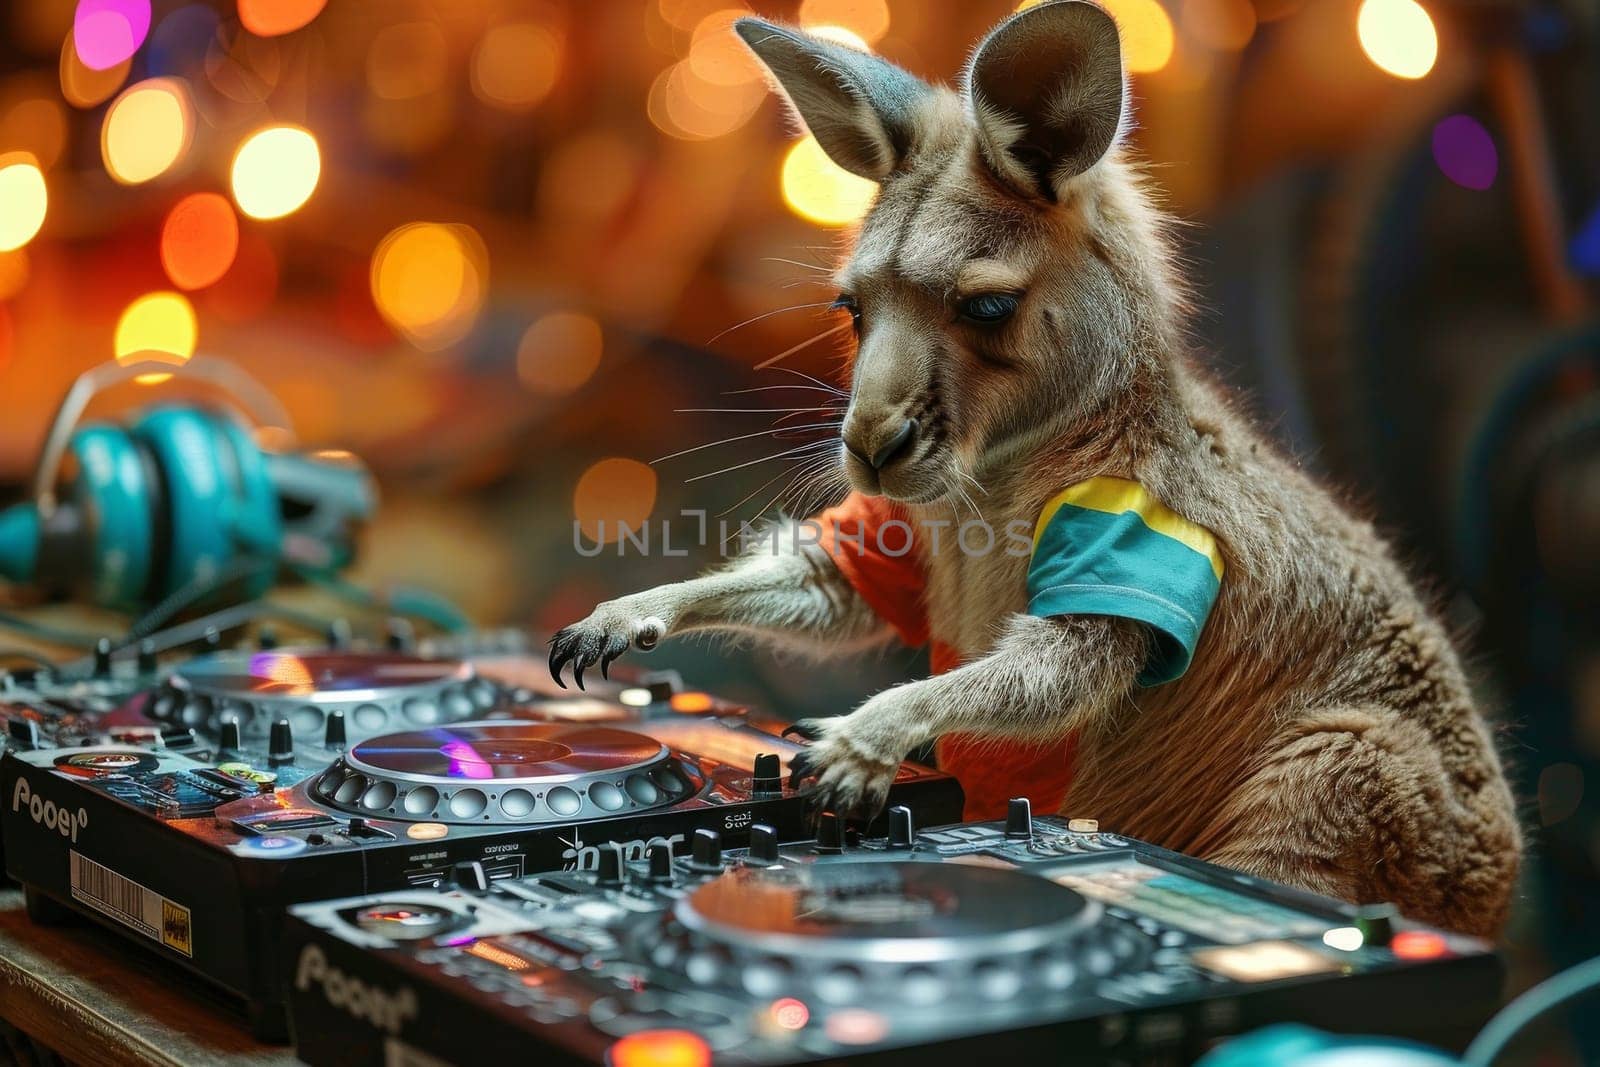 A kangaroo is playing a DJ set. The kangaroo is wearing a red and yellow shirt and is standing in front of a DJ set